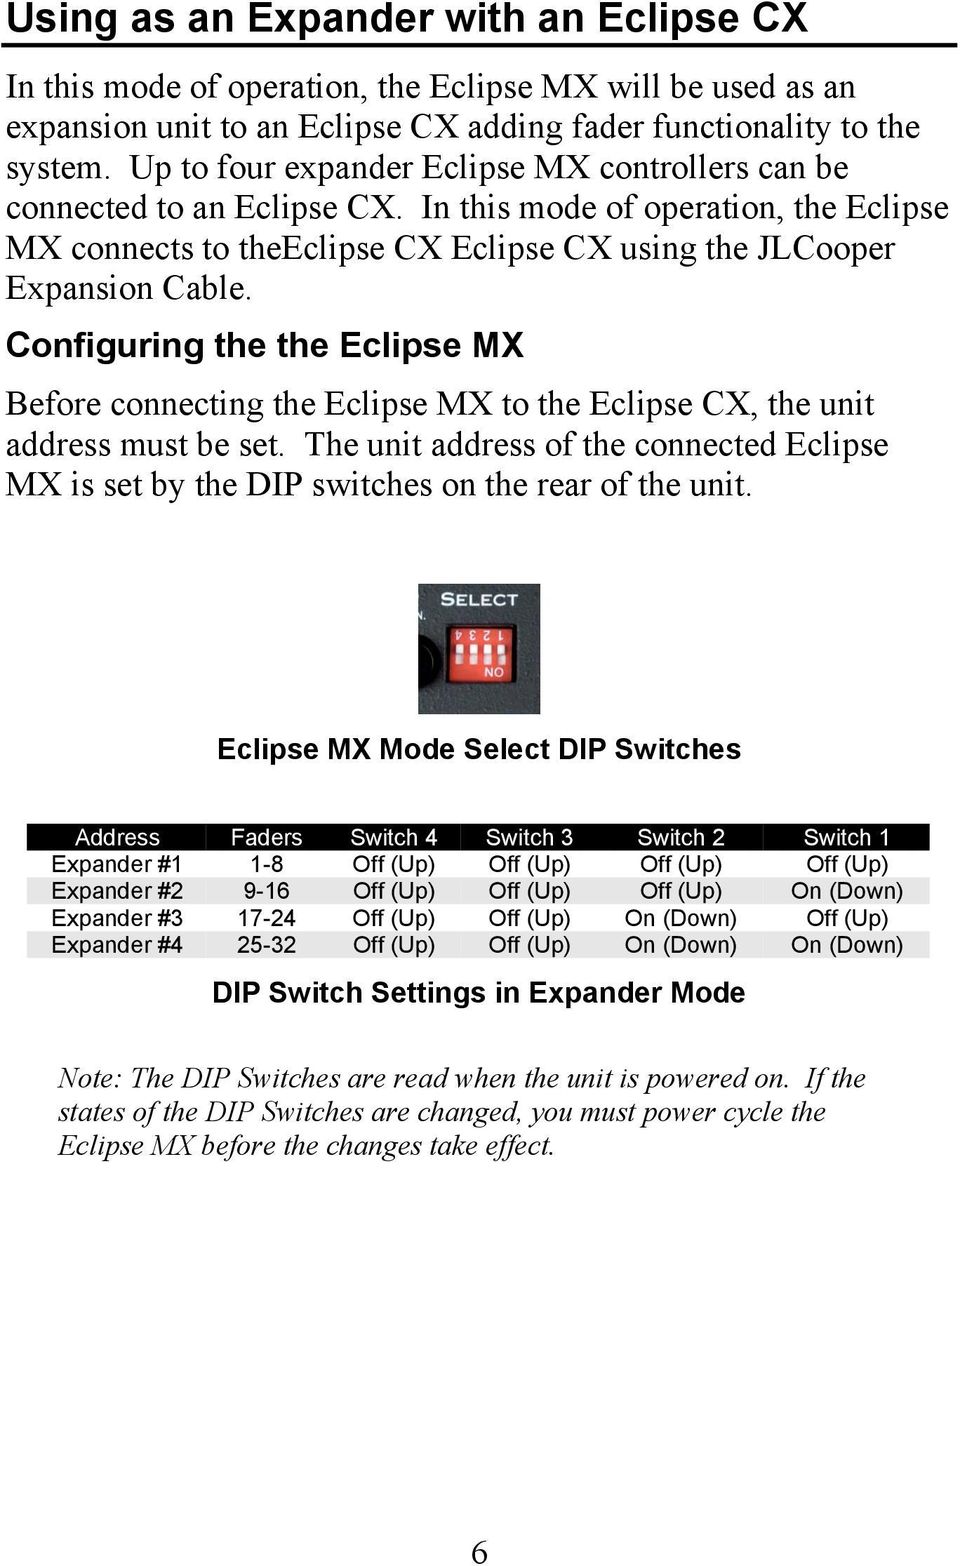 Configuring the the Eclipse MX Before connecting the Eclipse MX to the Eclipse CX, the unit address must be set.